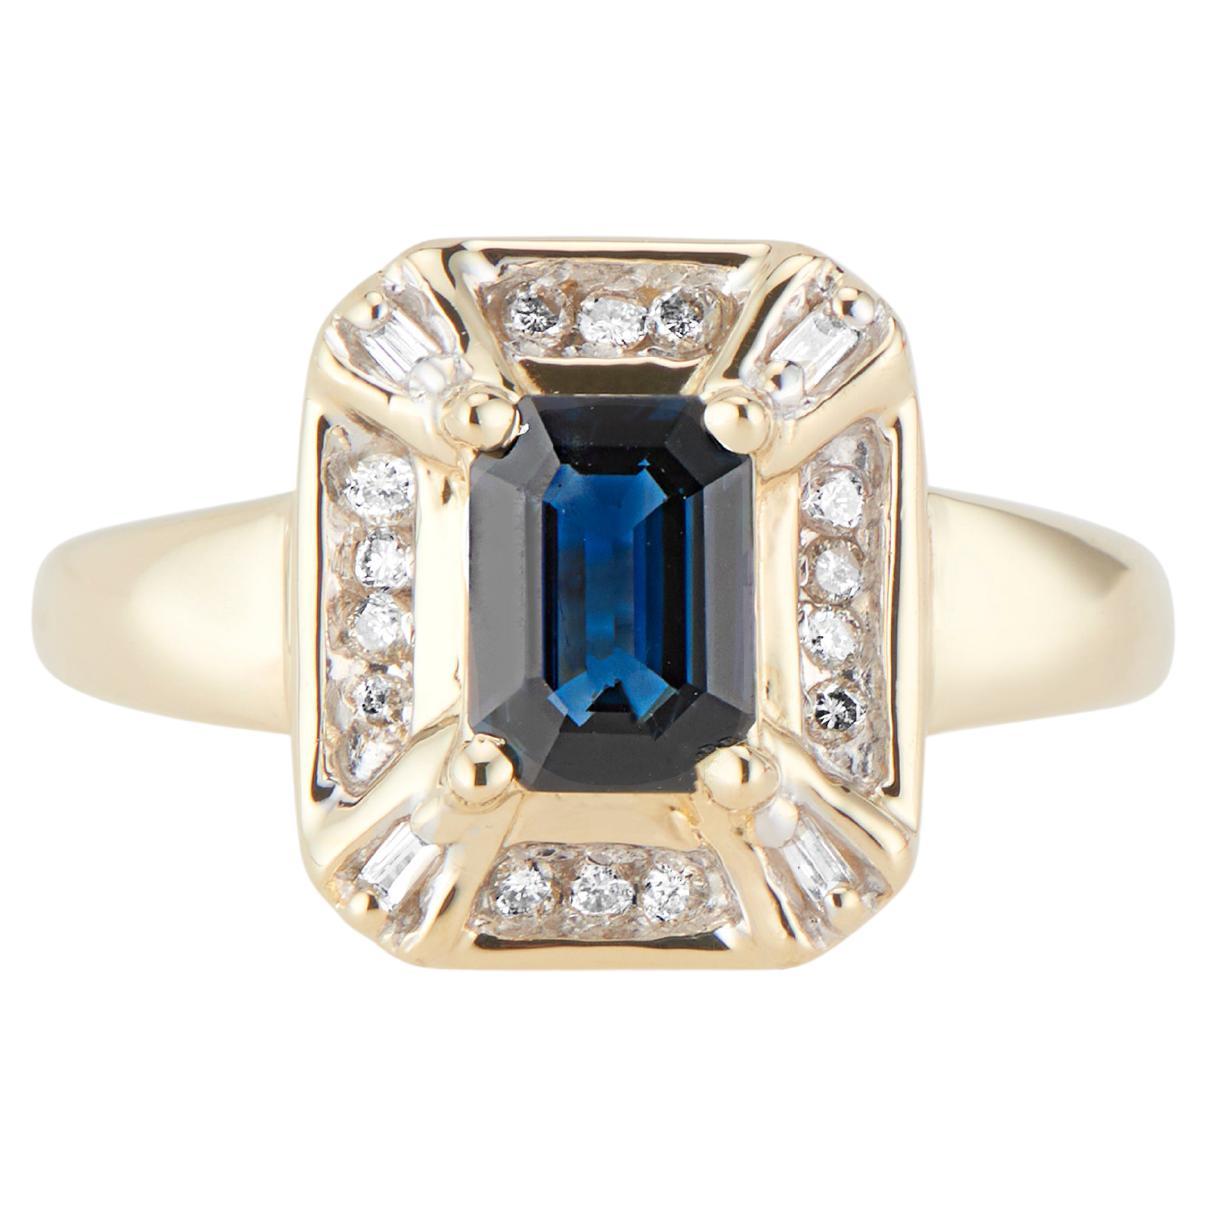 Vintage 14K Yellow Gold Diamond and Emerald Cut Sapphire Dress Ring For Sale